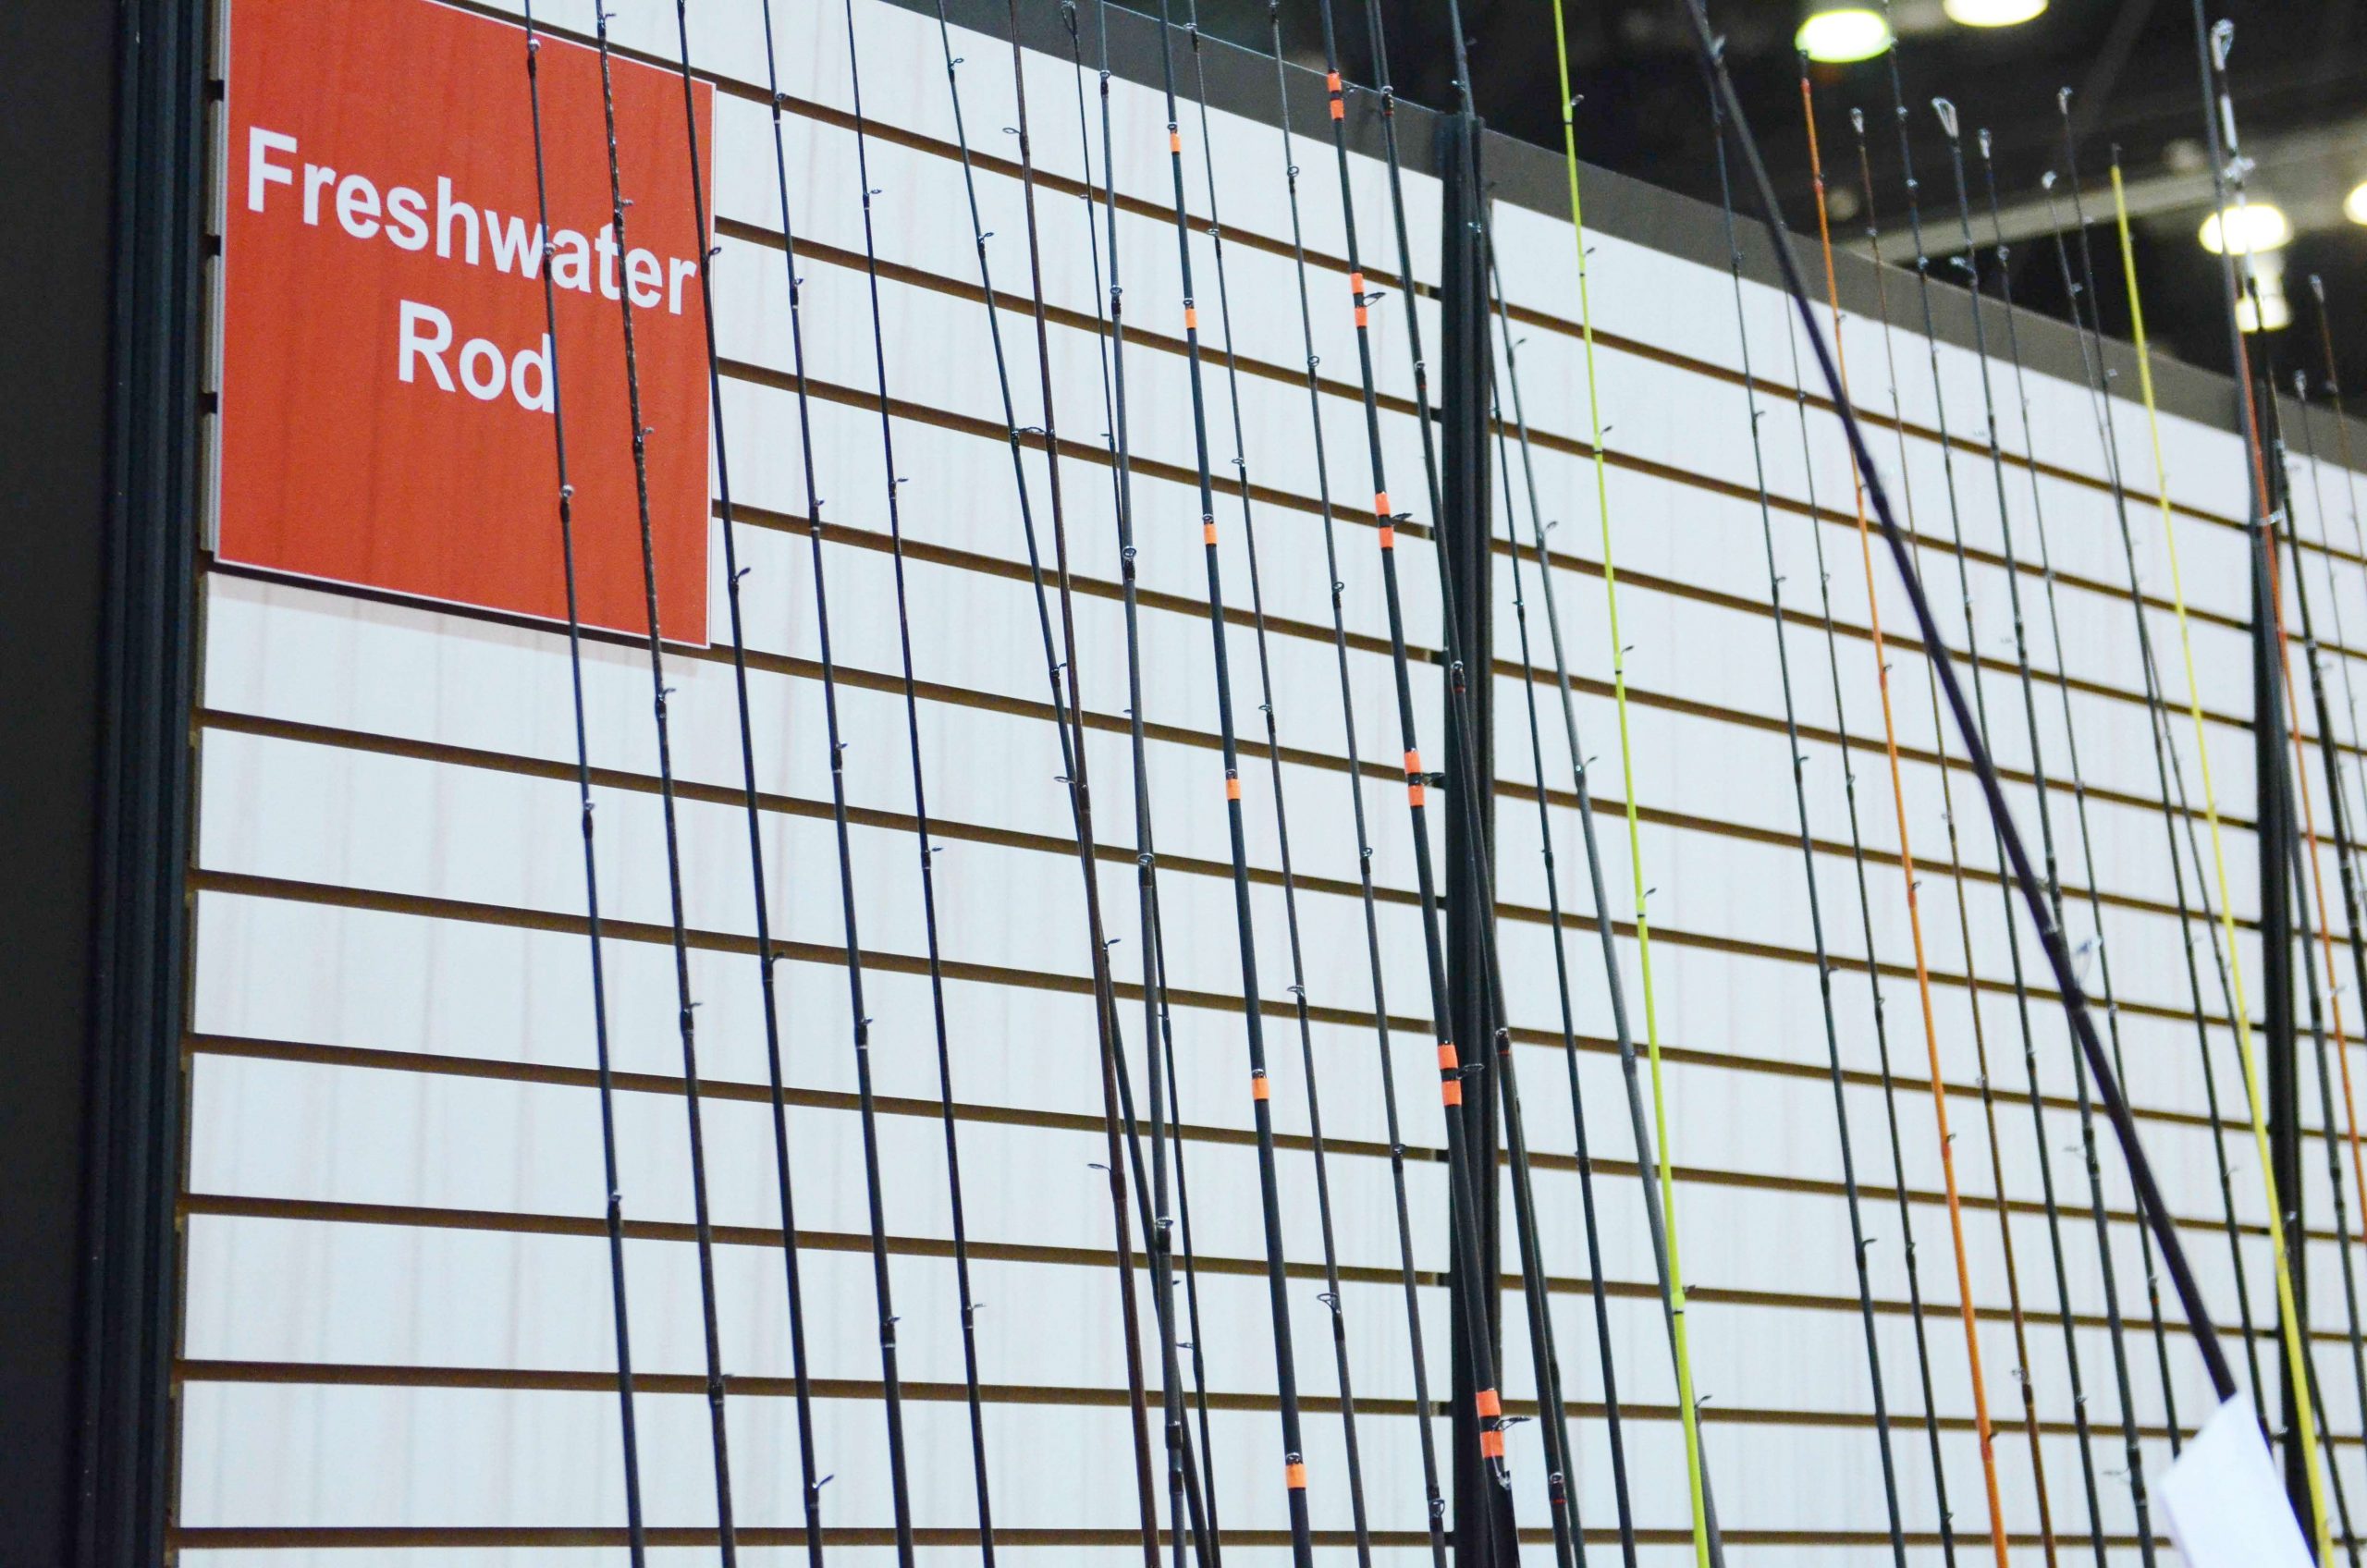 The New Product Showcase includes a long rack of freshwater rods and reels.